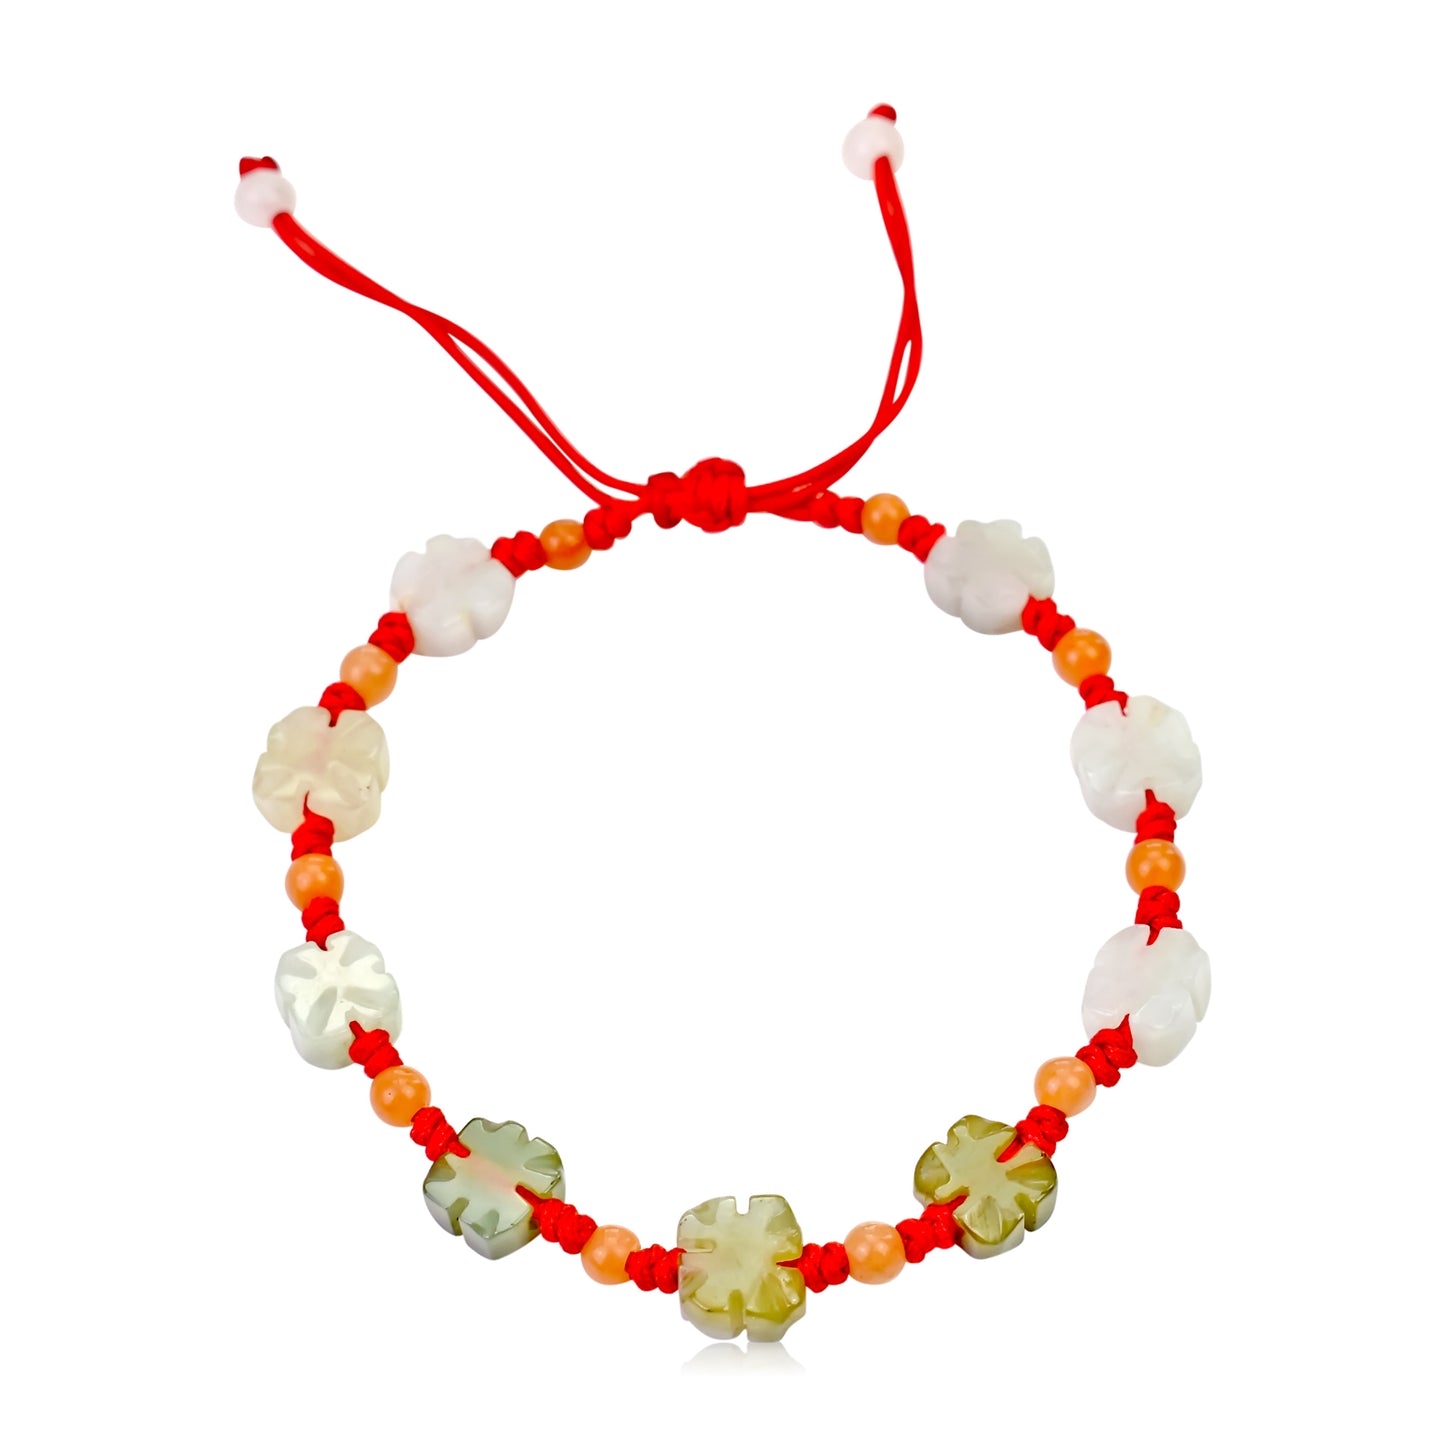 Feel the Fortune of the Four Leaf Clover Jade Bracelet made with Red Cord